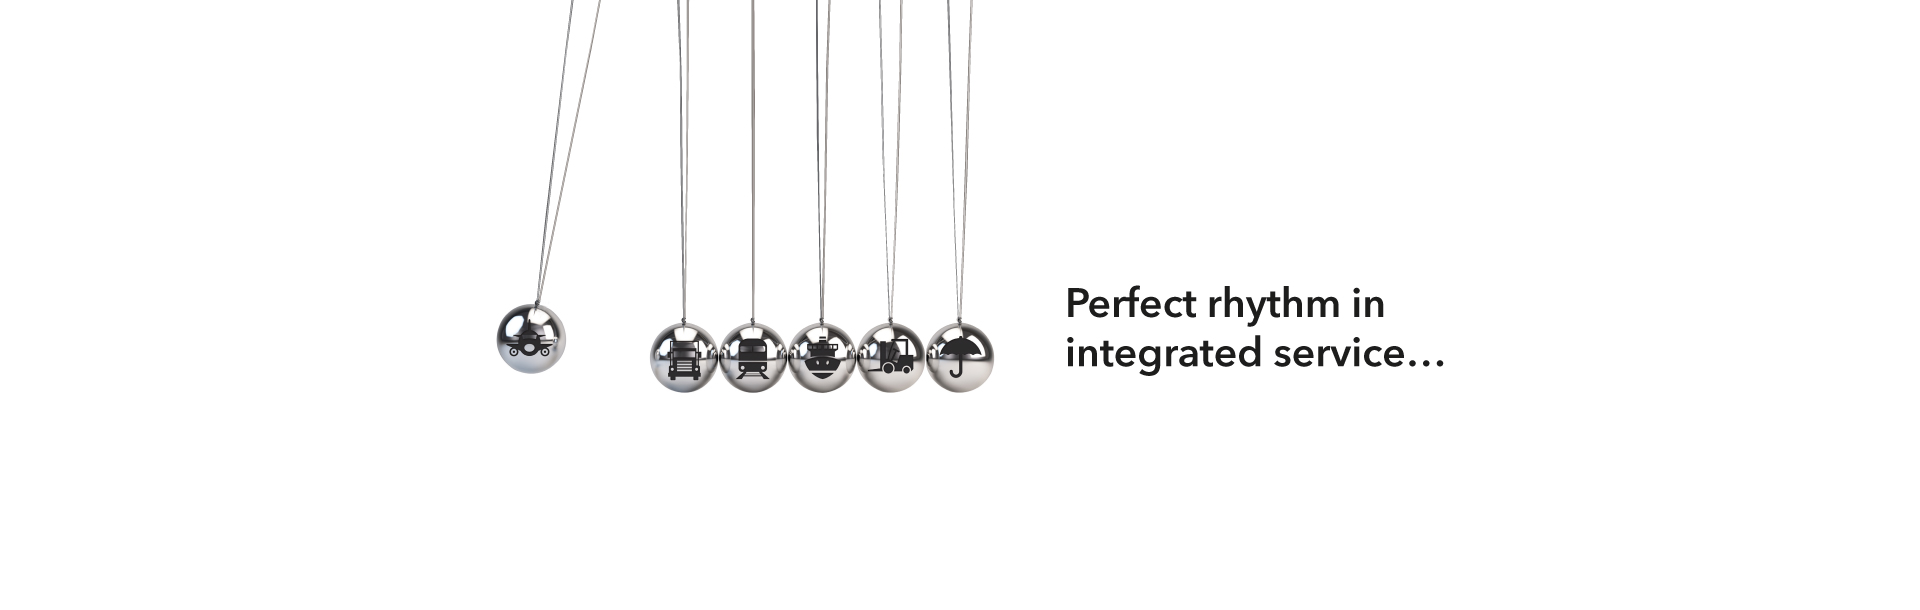 Perfect rhythm in integrated service